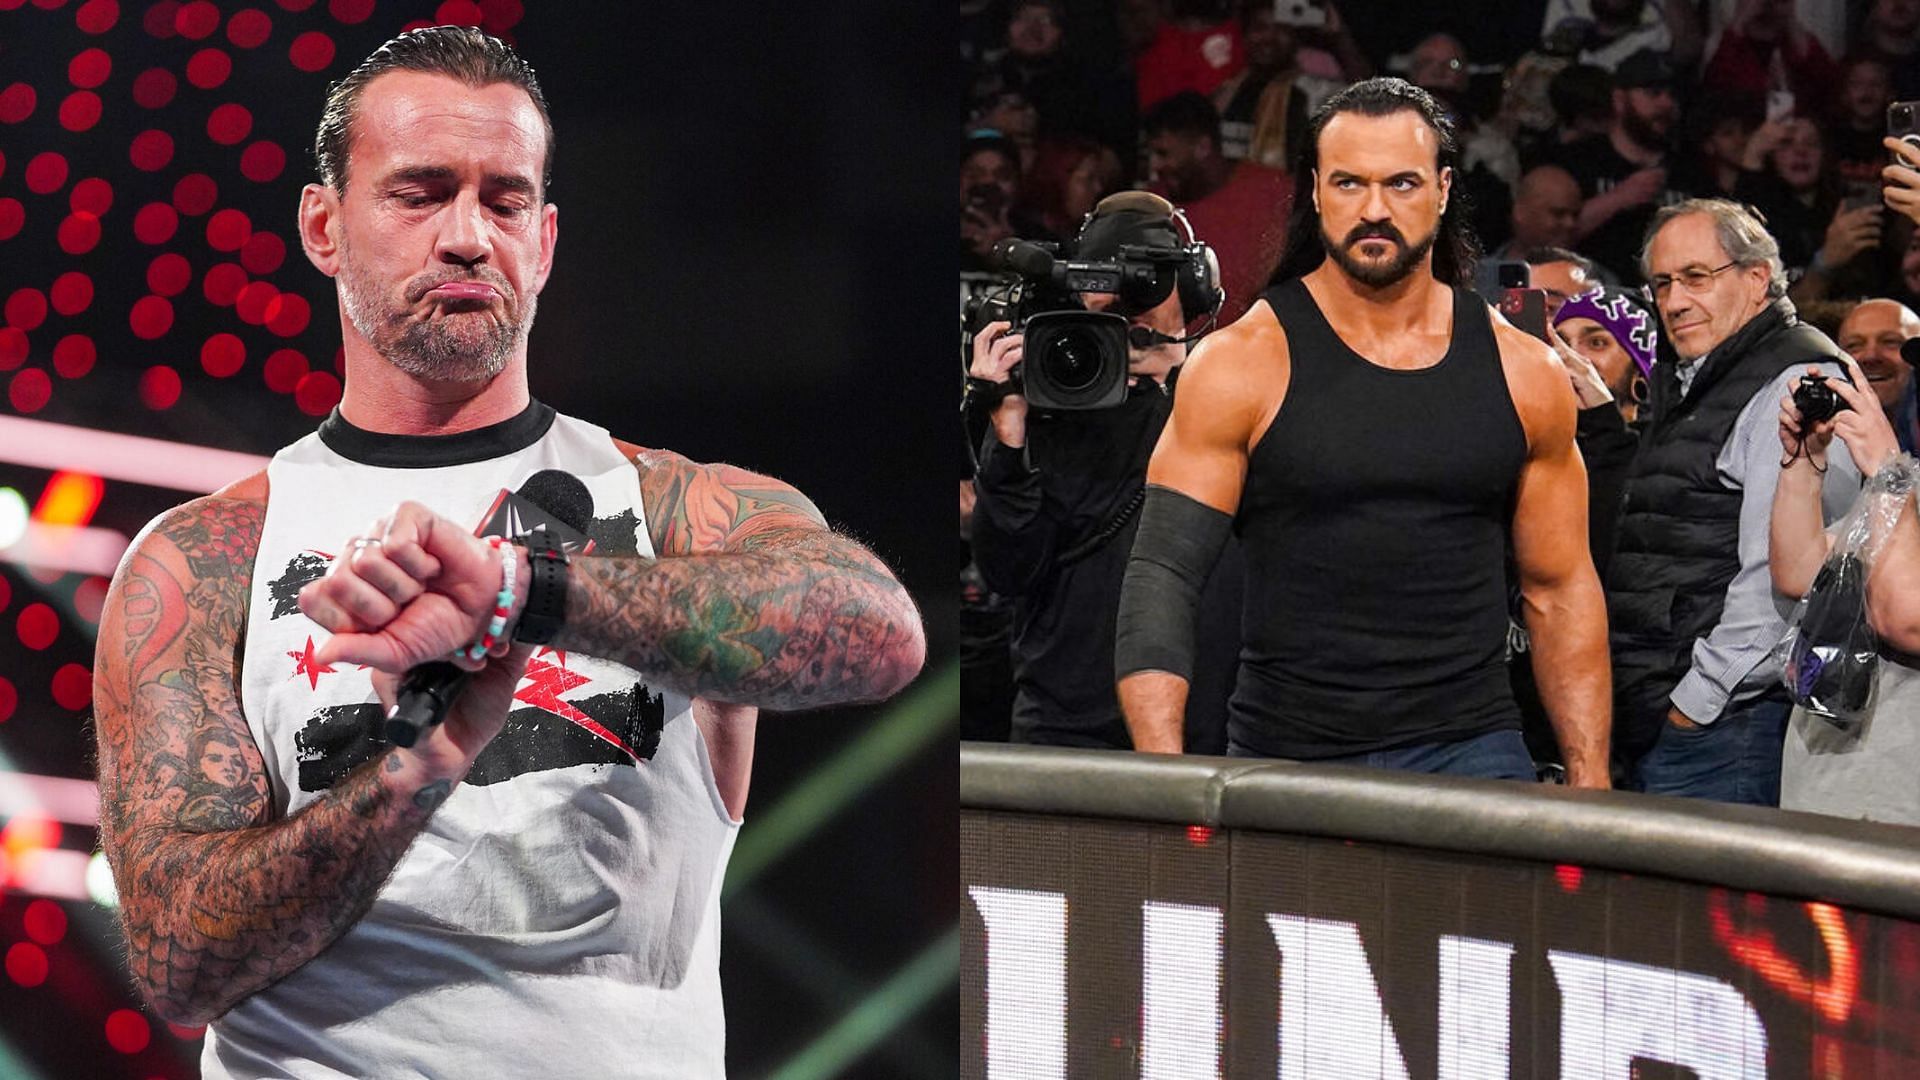 CM Punk continues to have Drew McIntyre